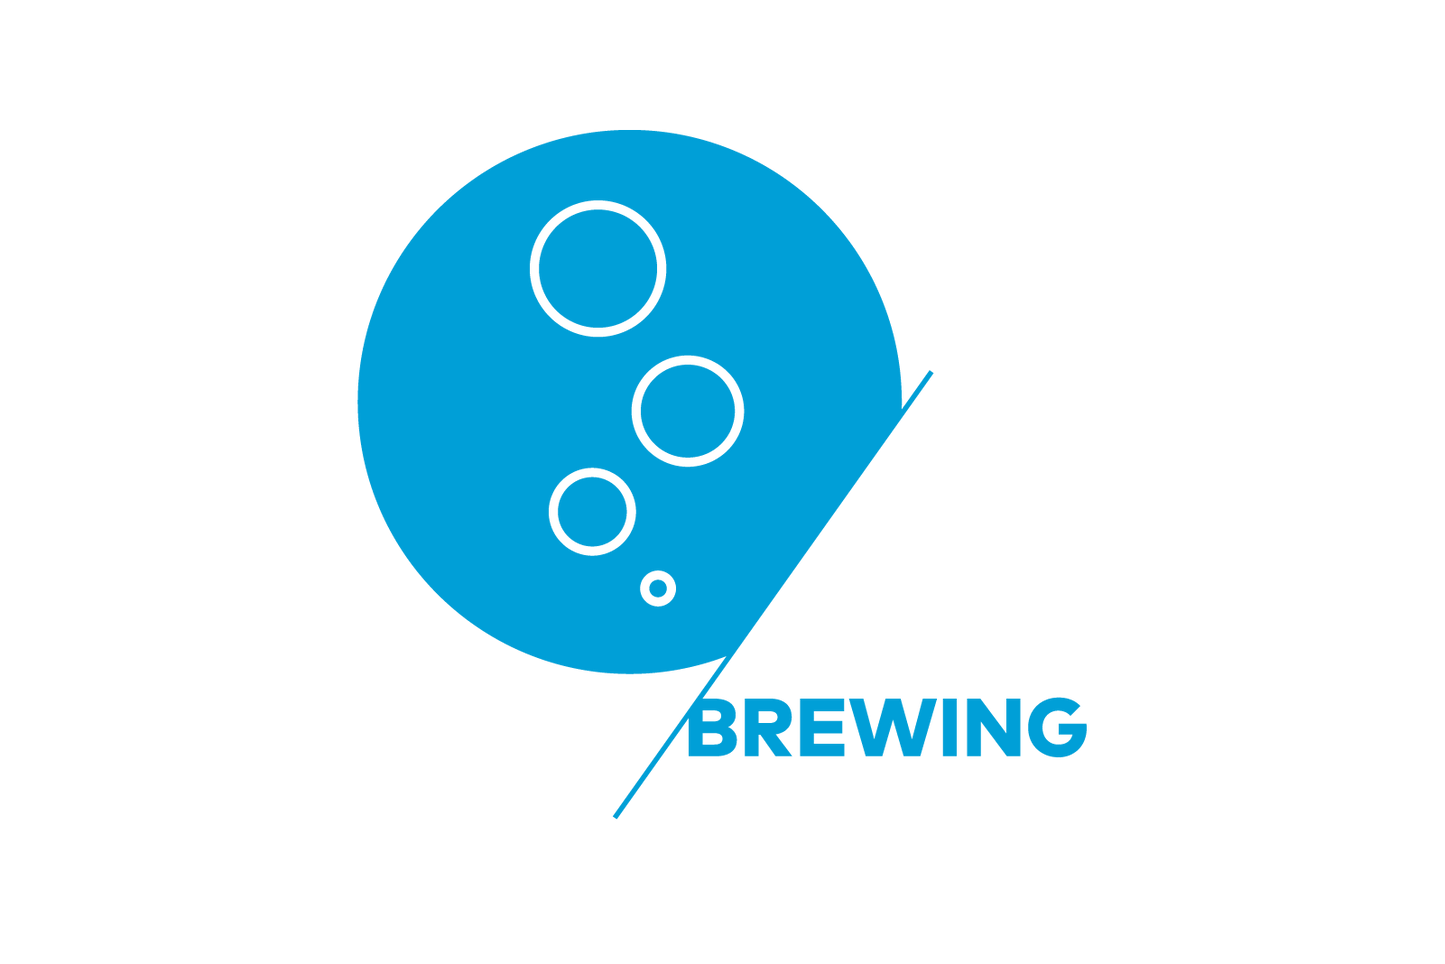 SCA Brewing - Professional